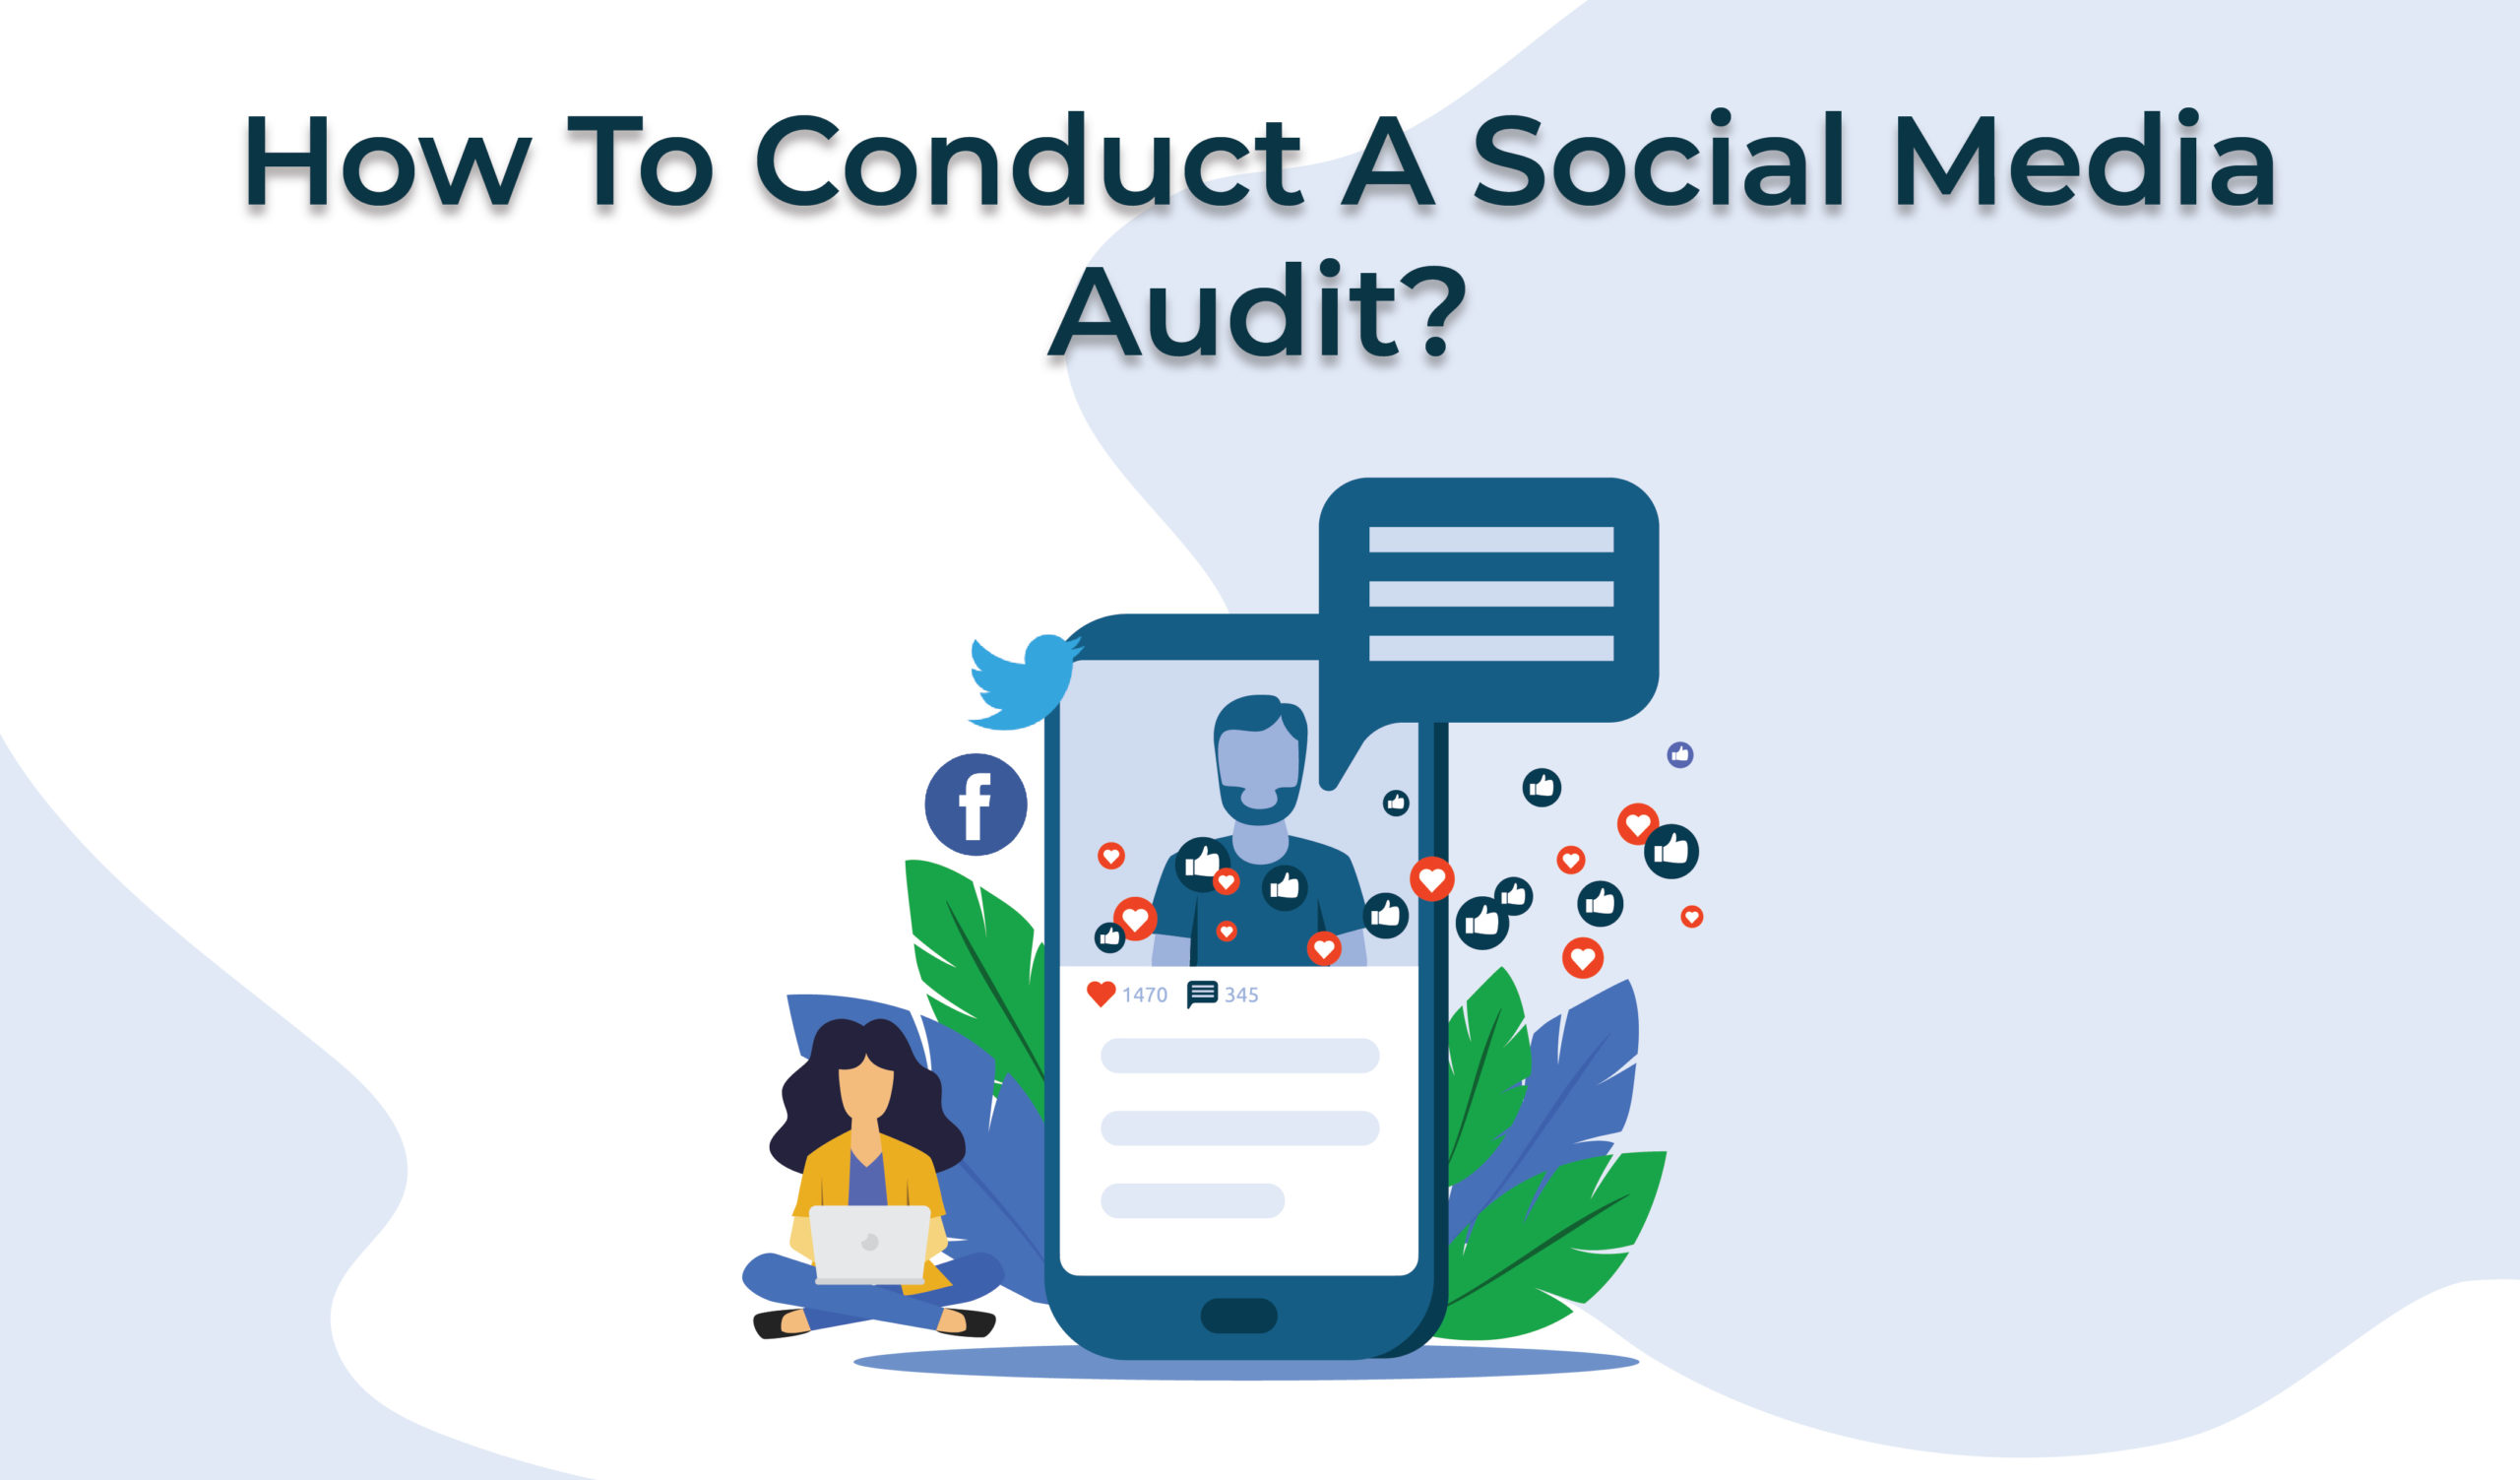 How to conduct a social media audit?